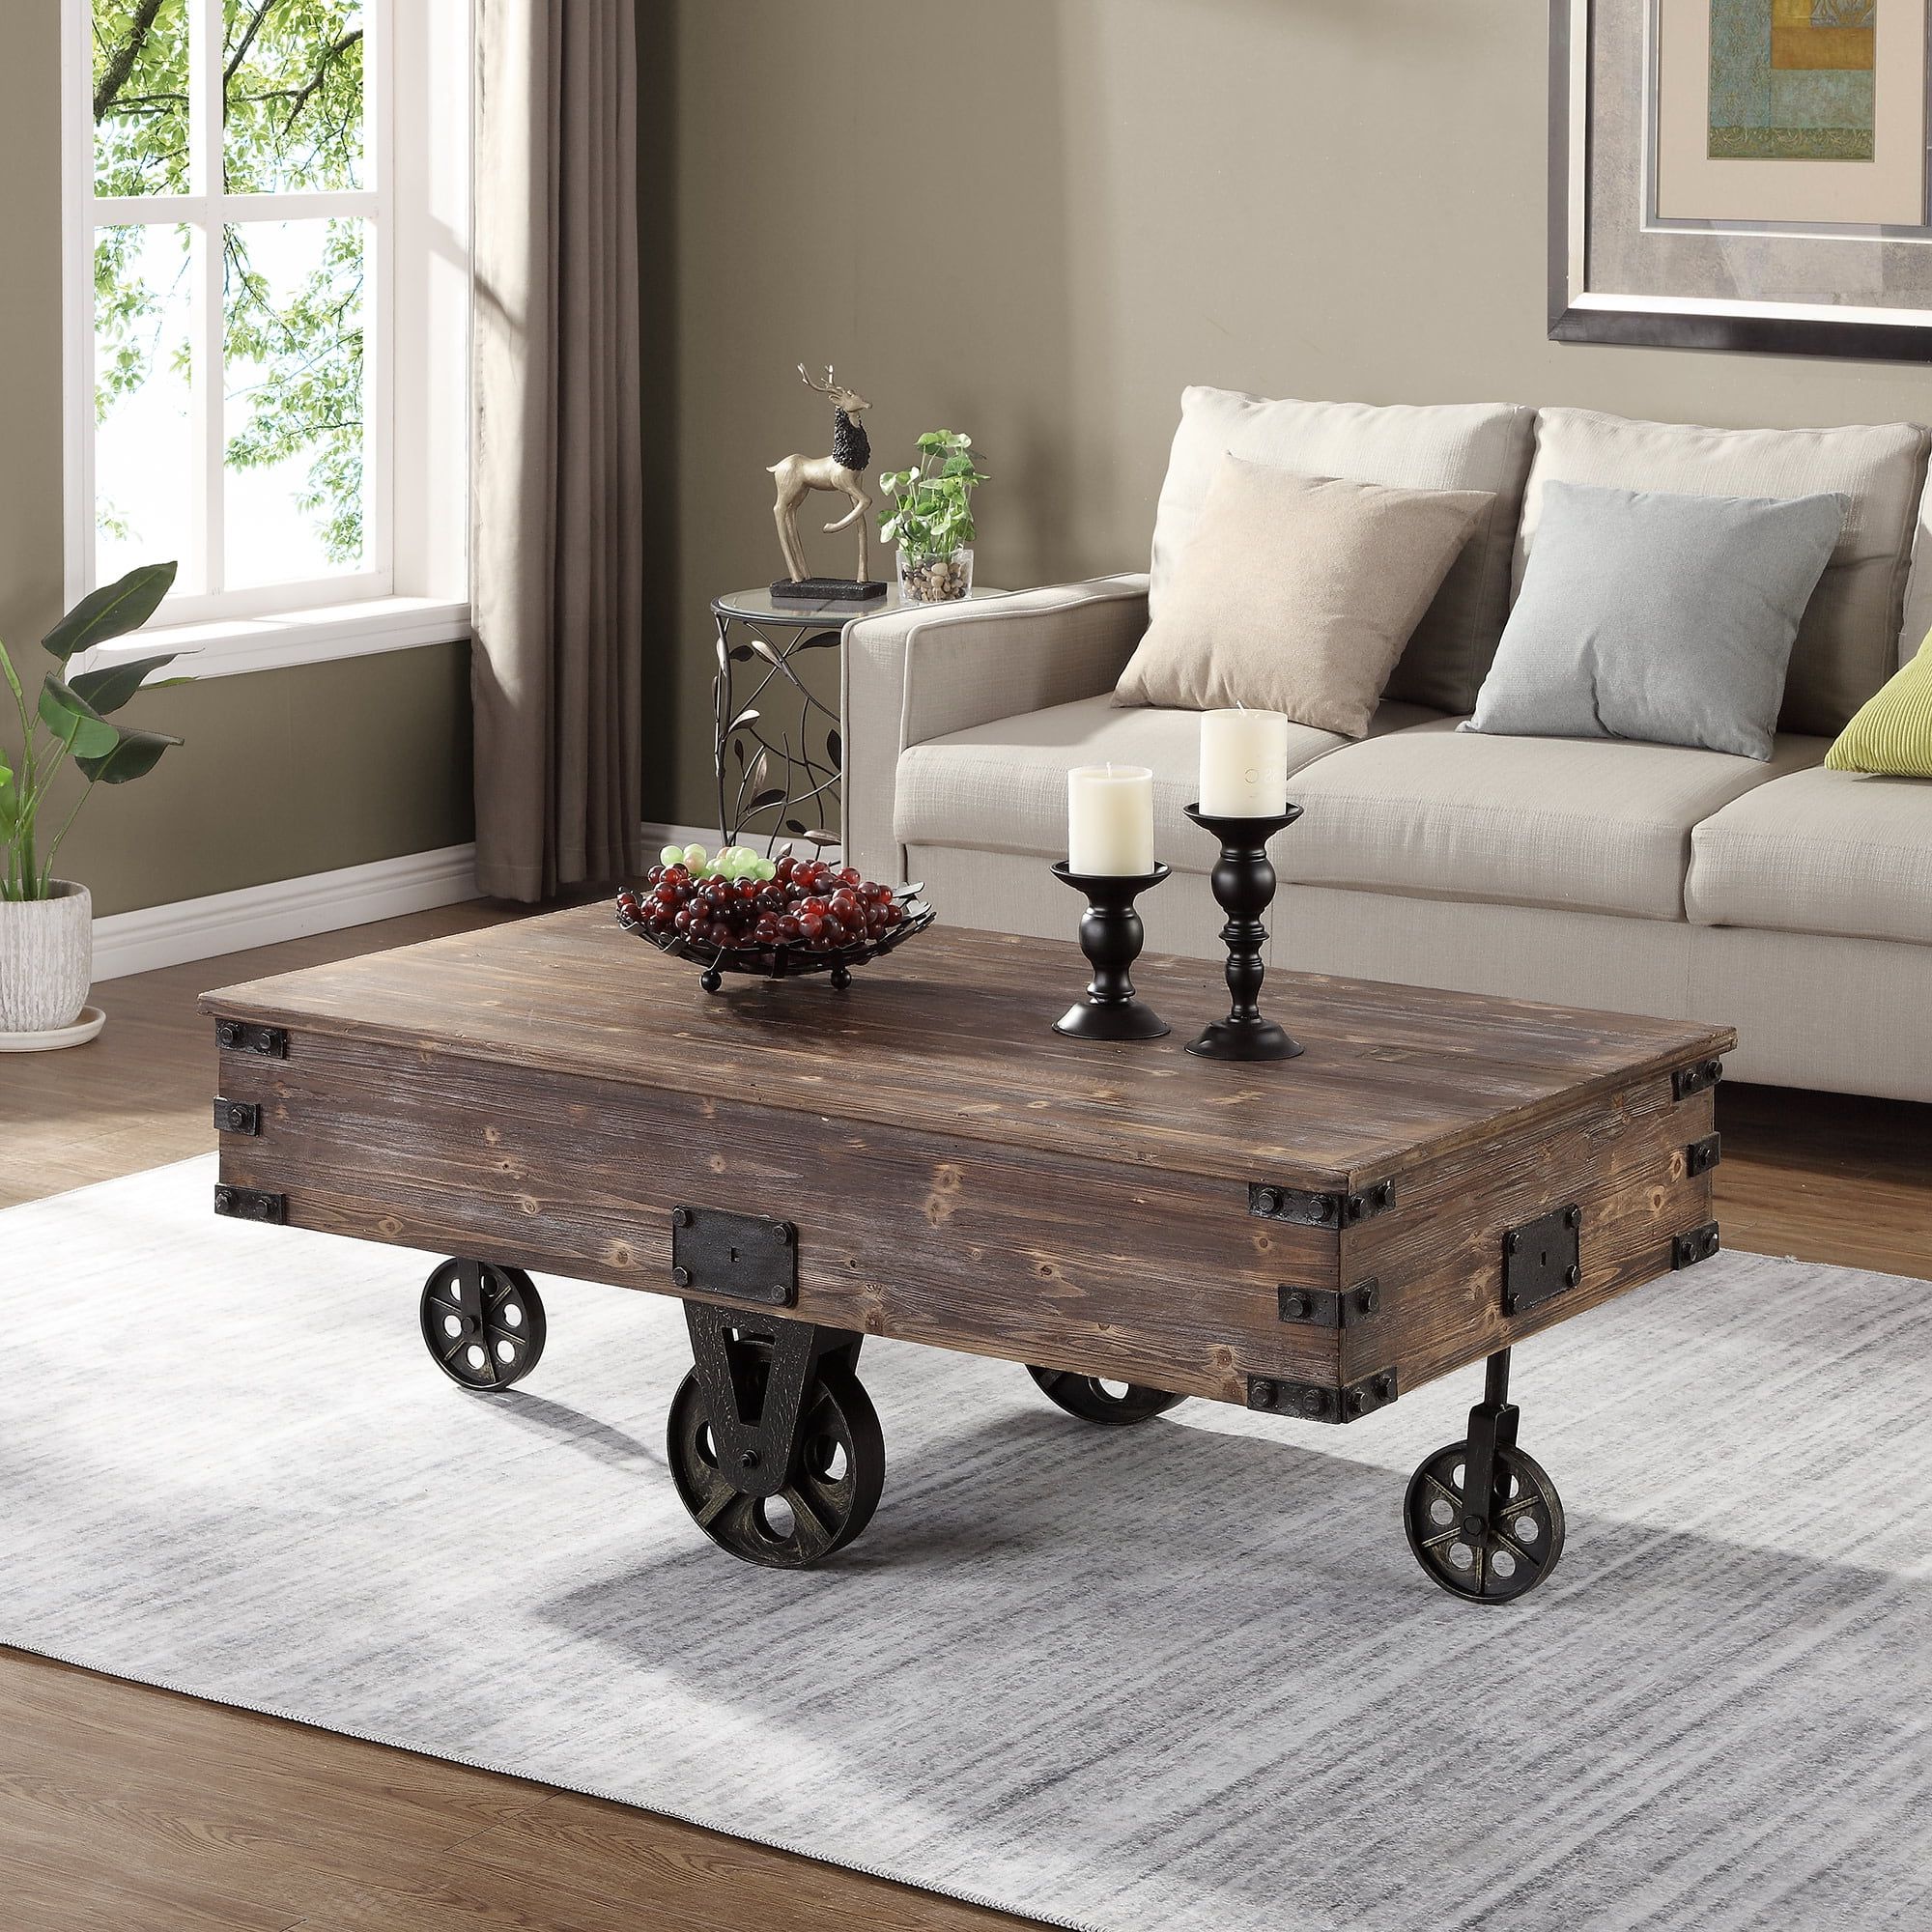 Firstime & Co. Brown Factory Cart Coffee Table, Farmhouse, Rustic Inside Brown Rustic Coffee Tables (Gallery 5 of 20)